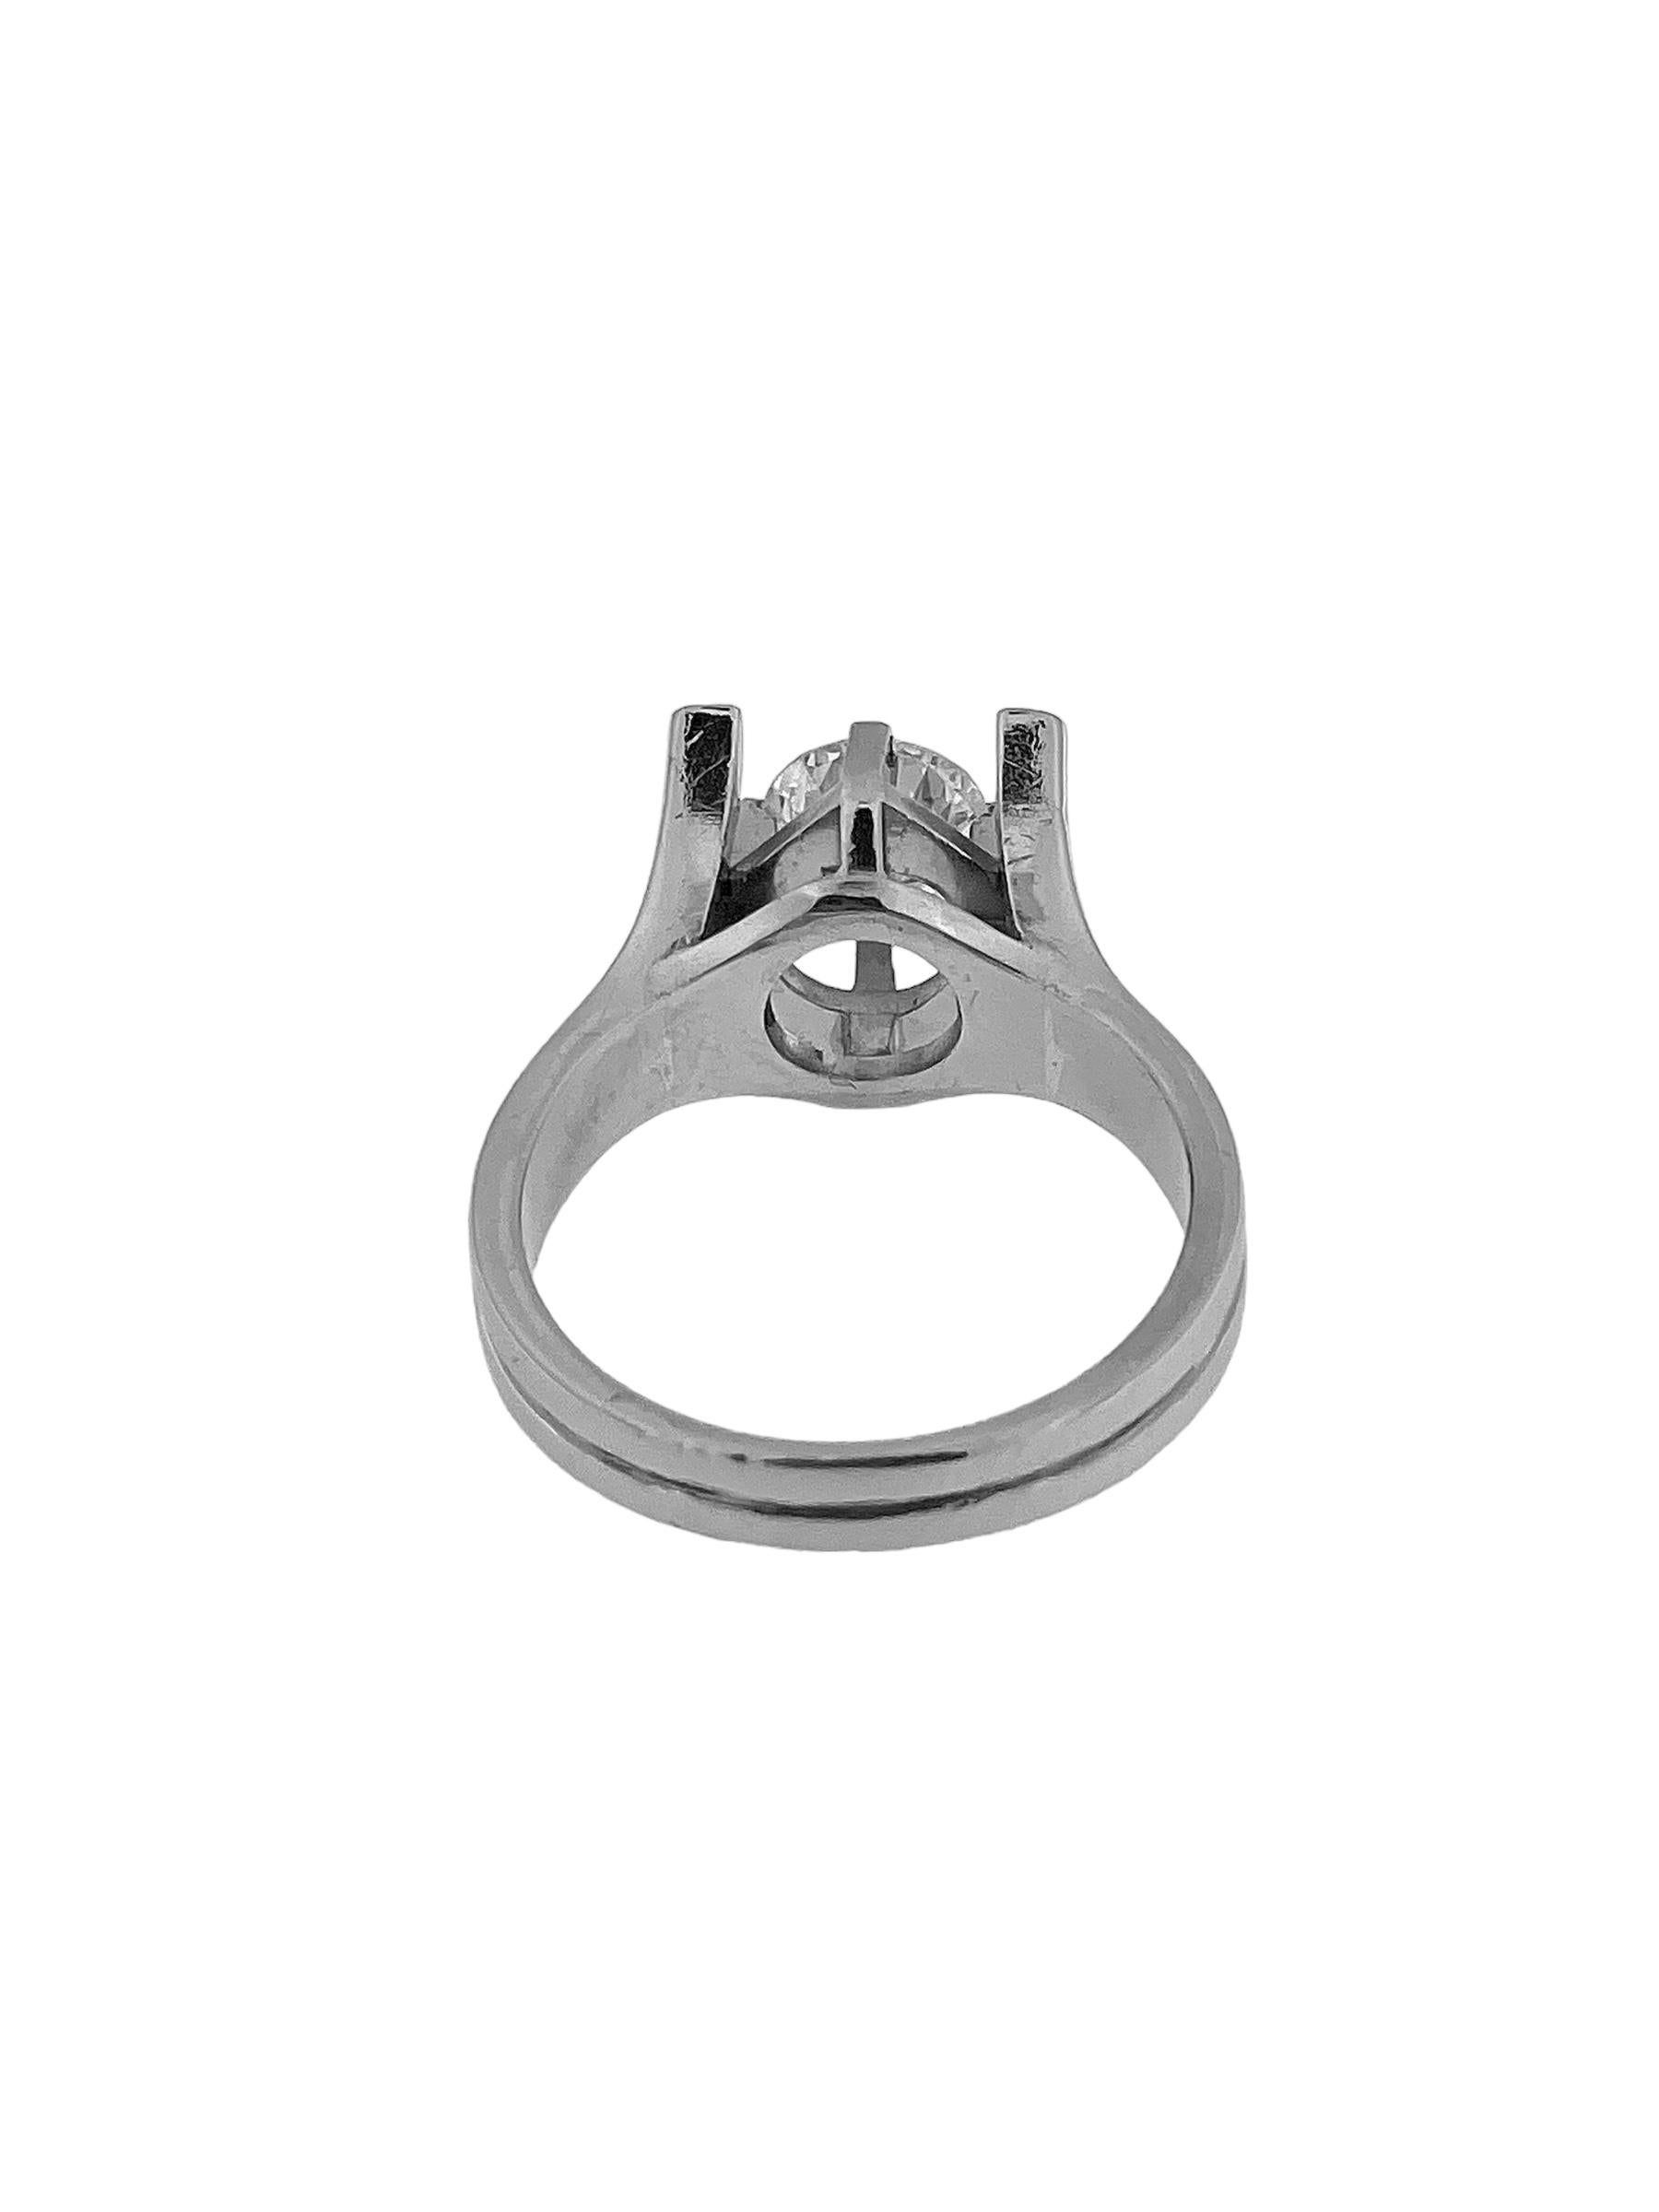 HRD Certified Palladium and Diamond Solitaire Ring For Sale 3